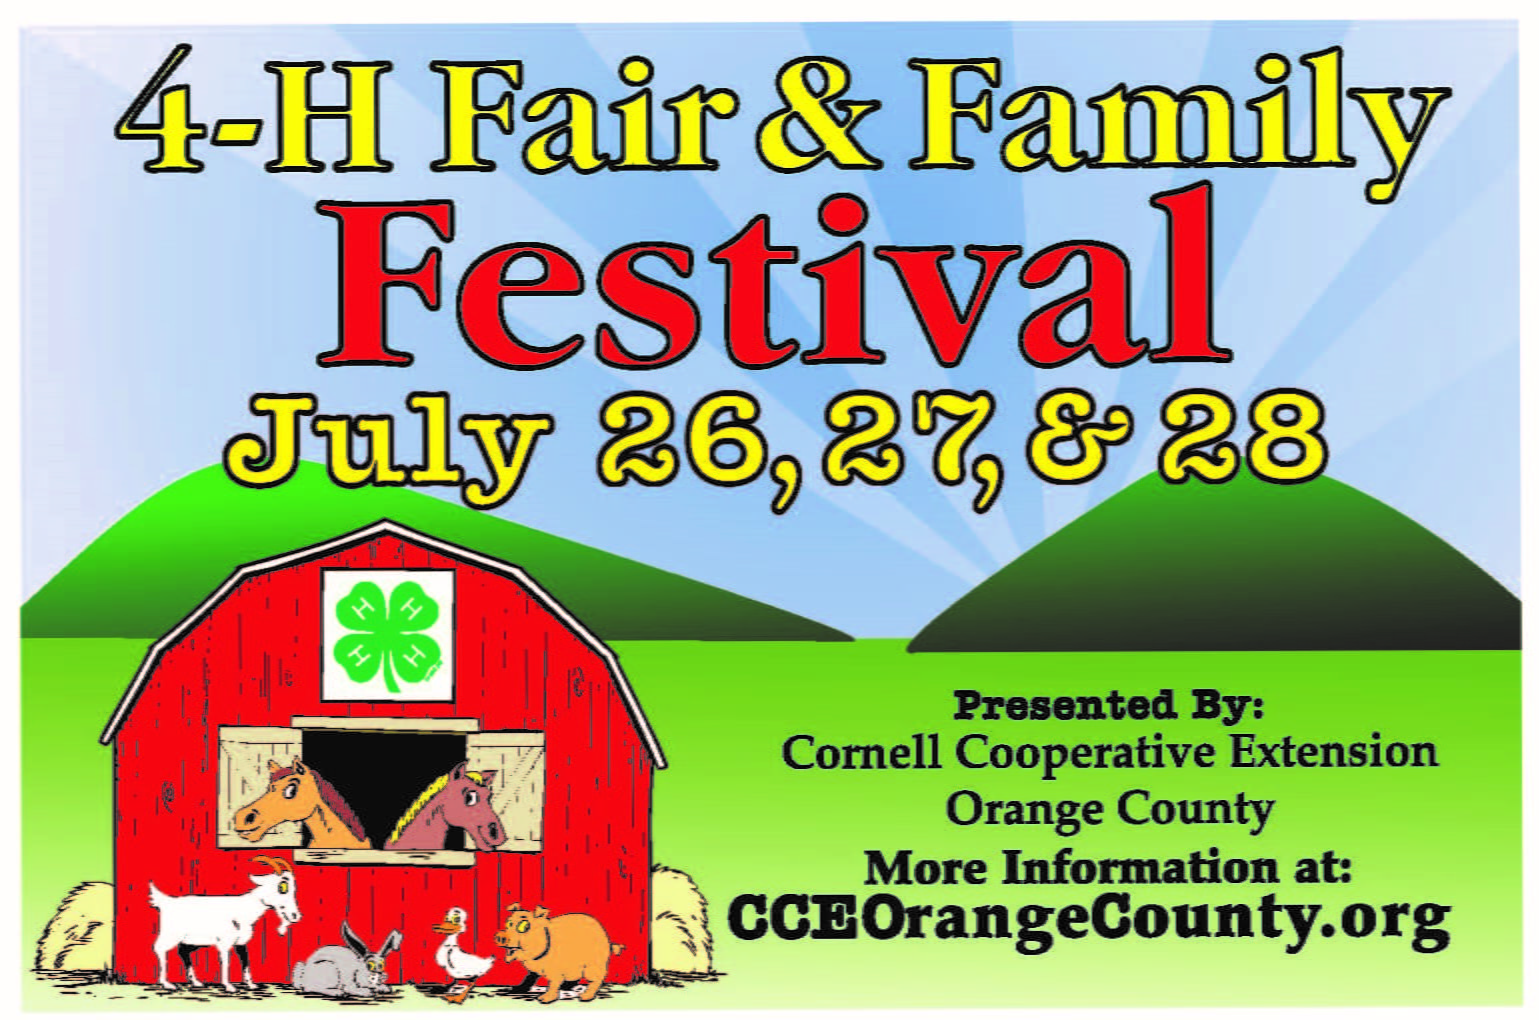 4-H Fair & Family Festival, July 26, 27, & 28, Presented by: Cornell Cooperative Extension Orange County, More information at cceorangecounty.org